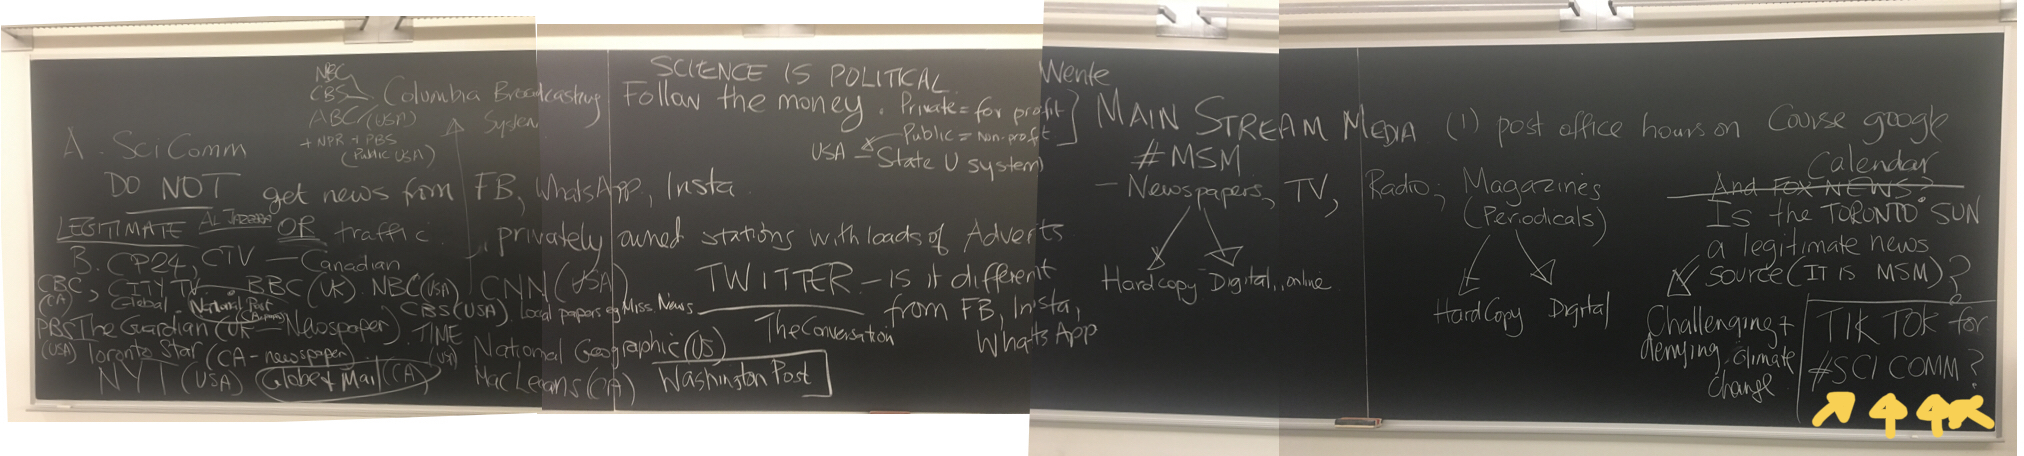 chalkboard from BIOL 4095 January 10, 2020 lecture 